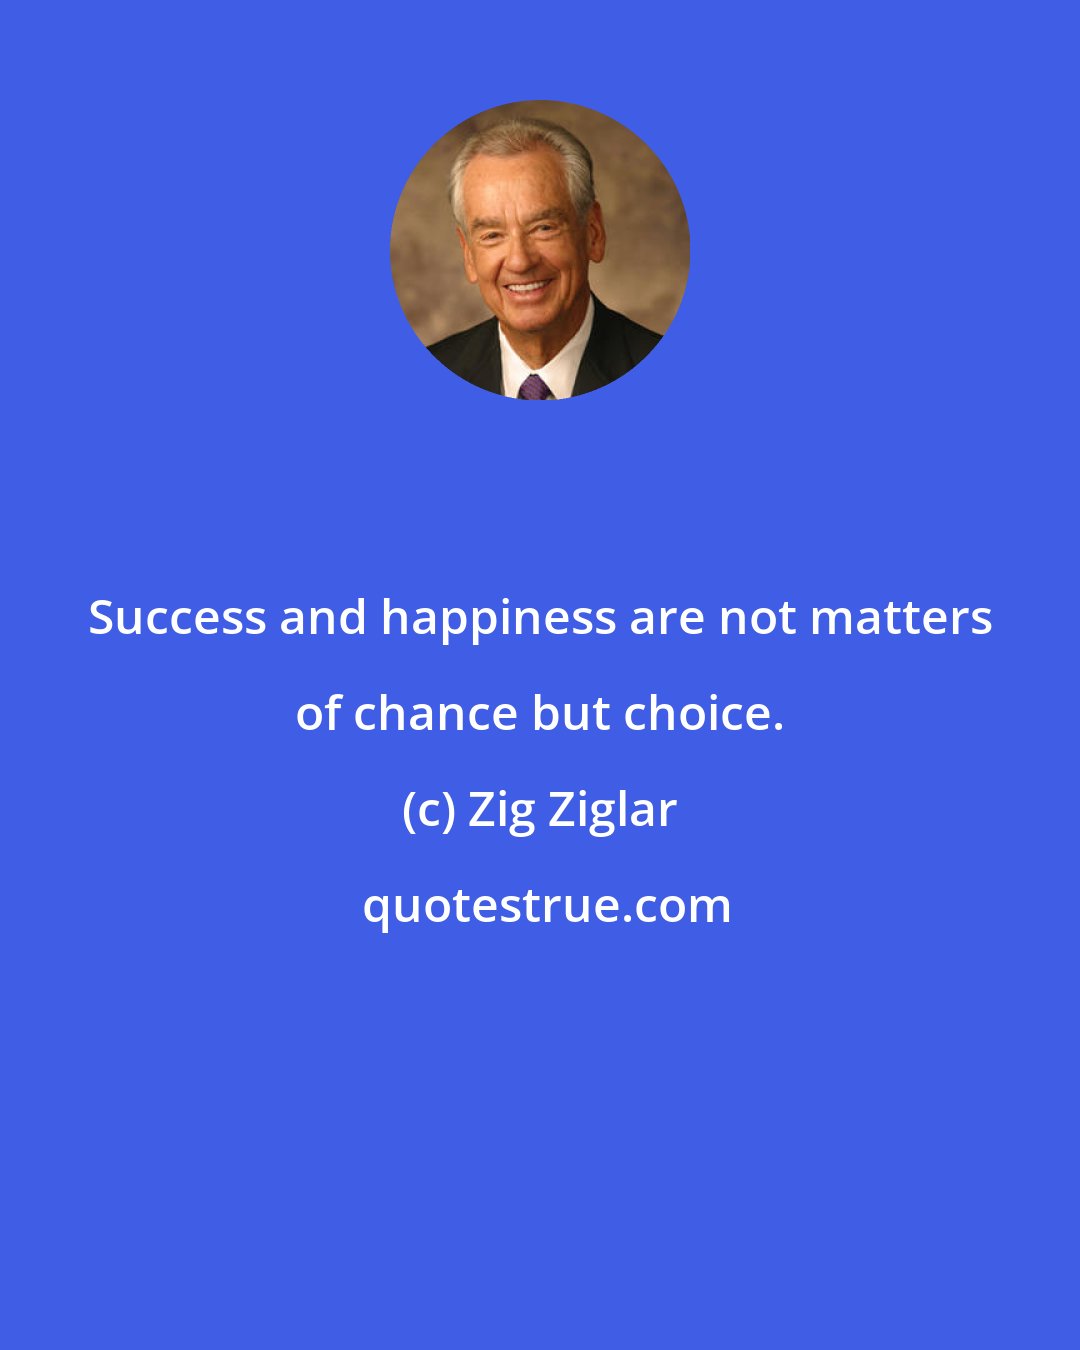 Zig Ziglar: Success and happiness are not matters of chance but choice.